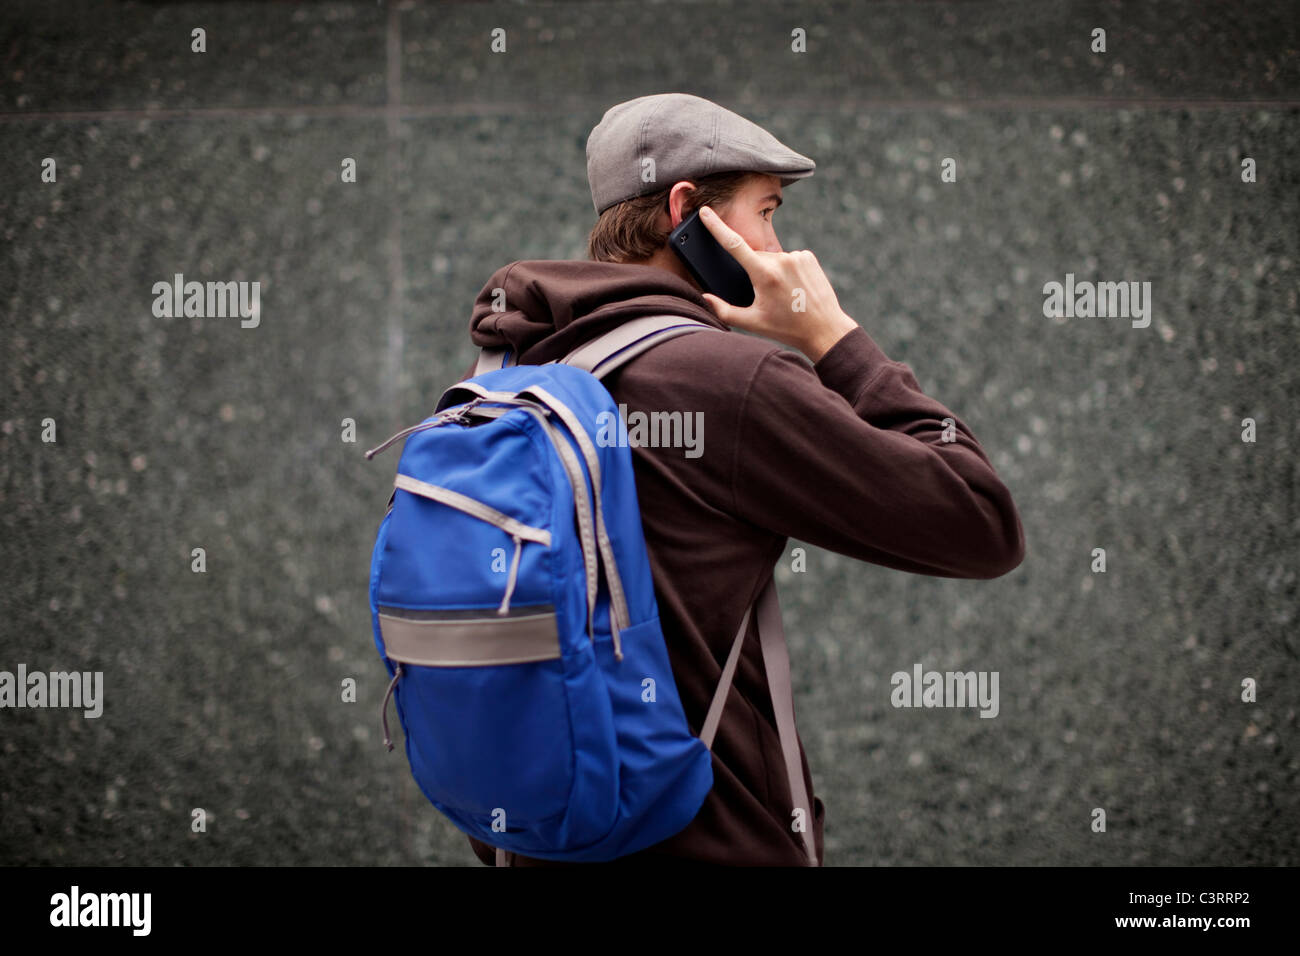 Caucasian man in backpack talking on cell phone Stock Photo